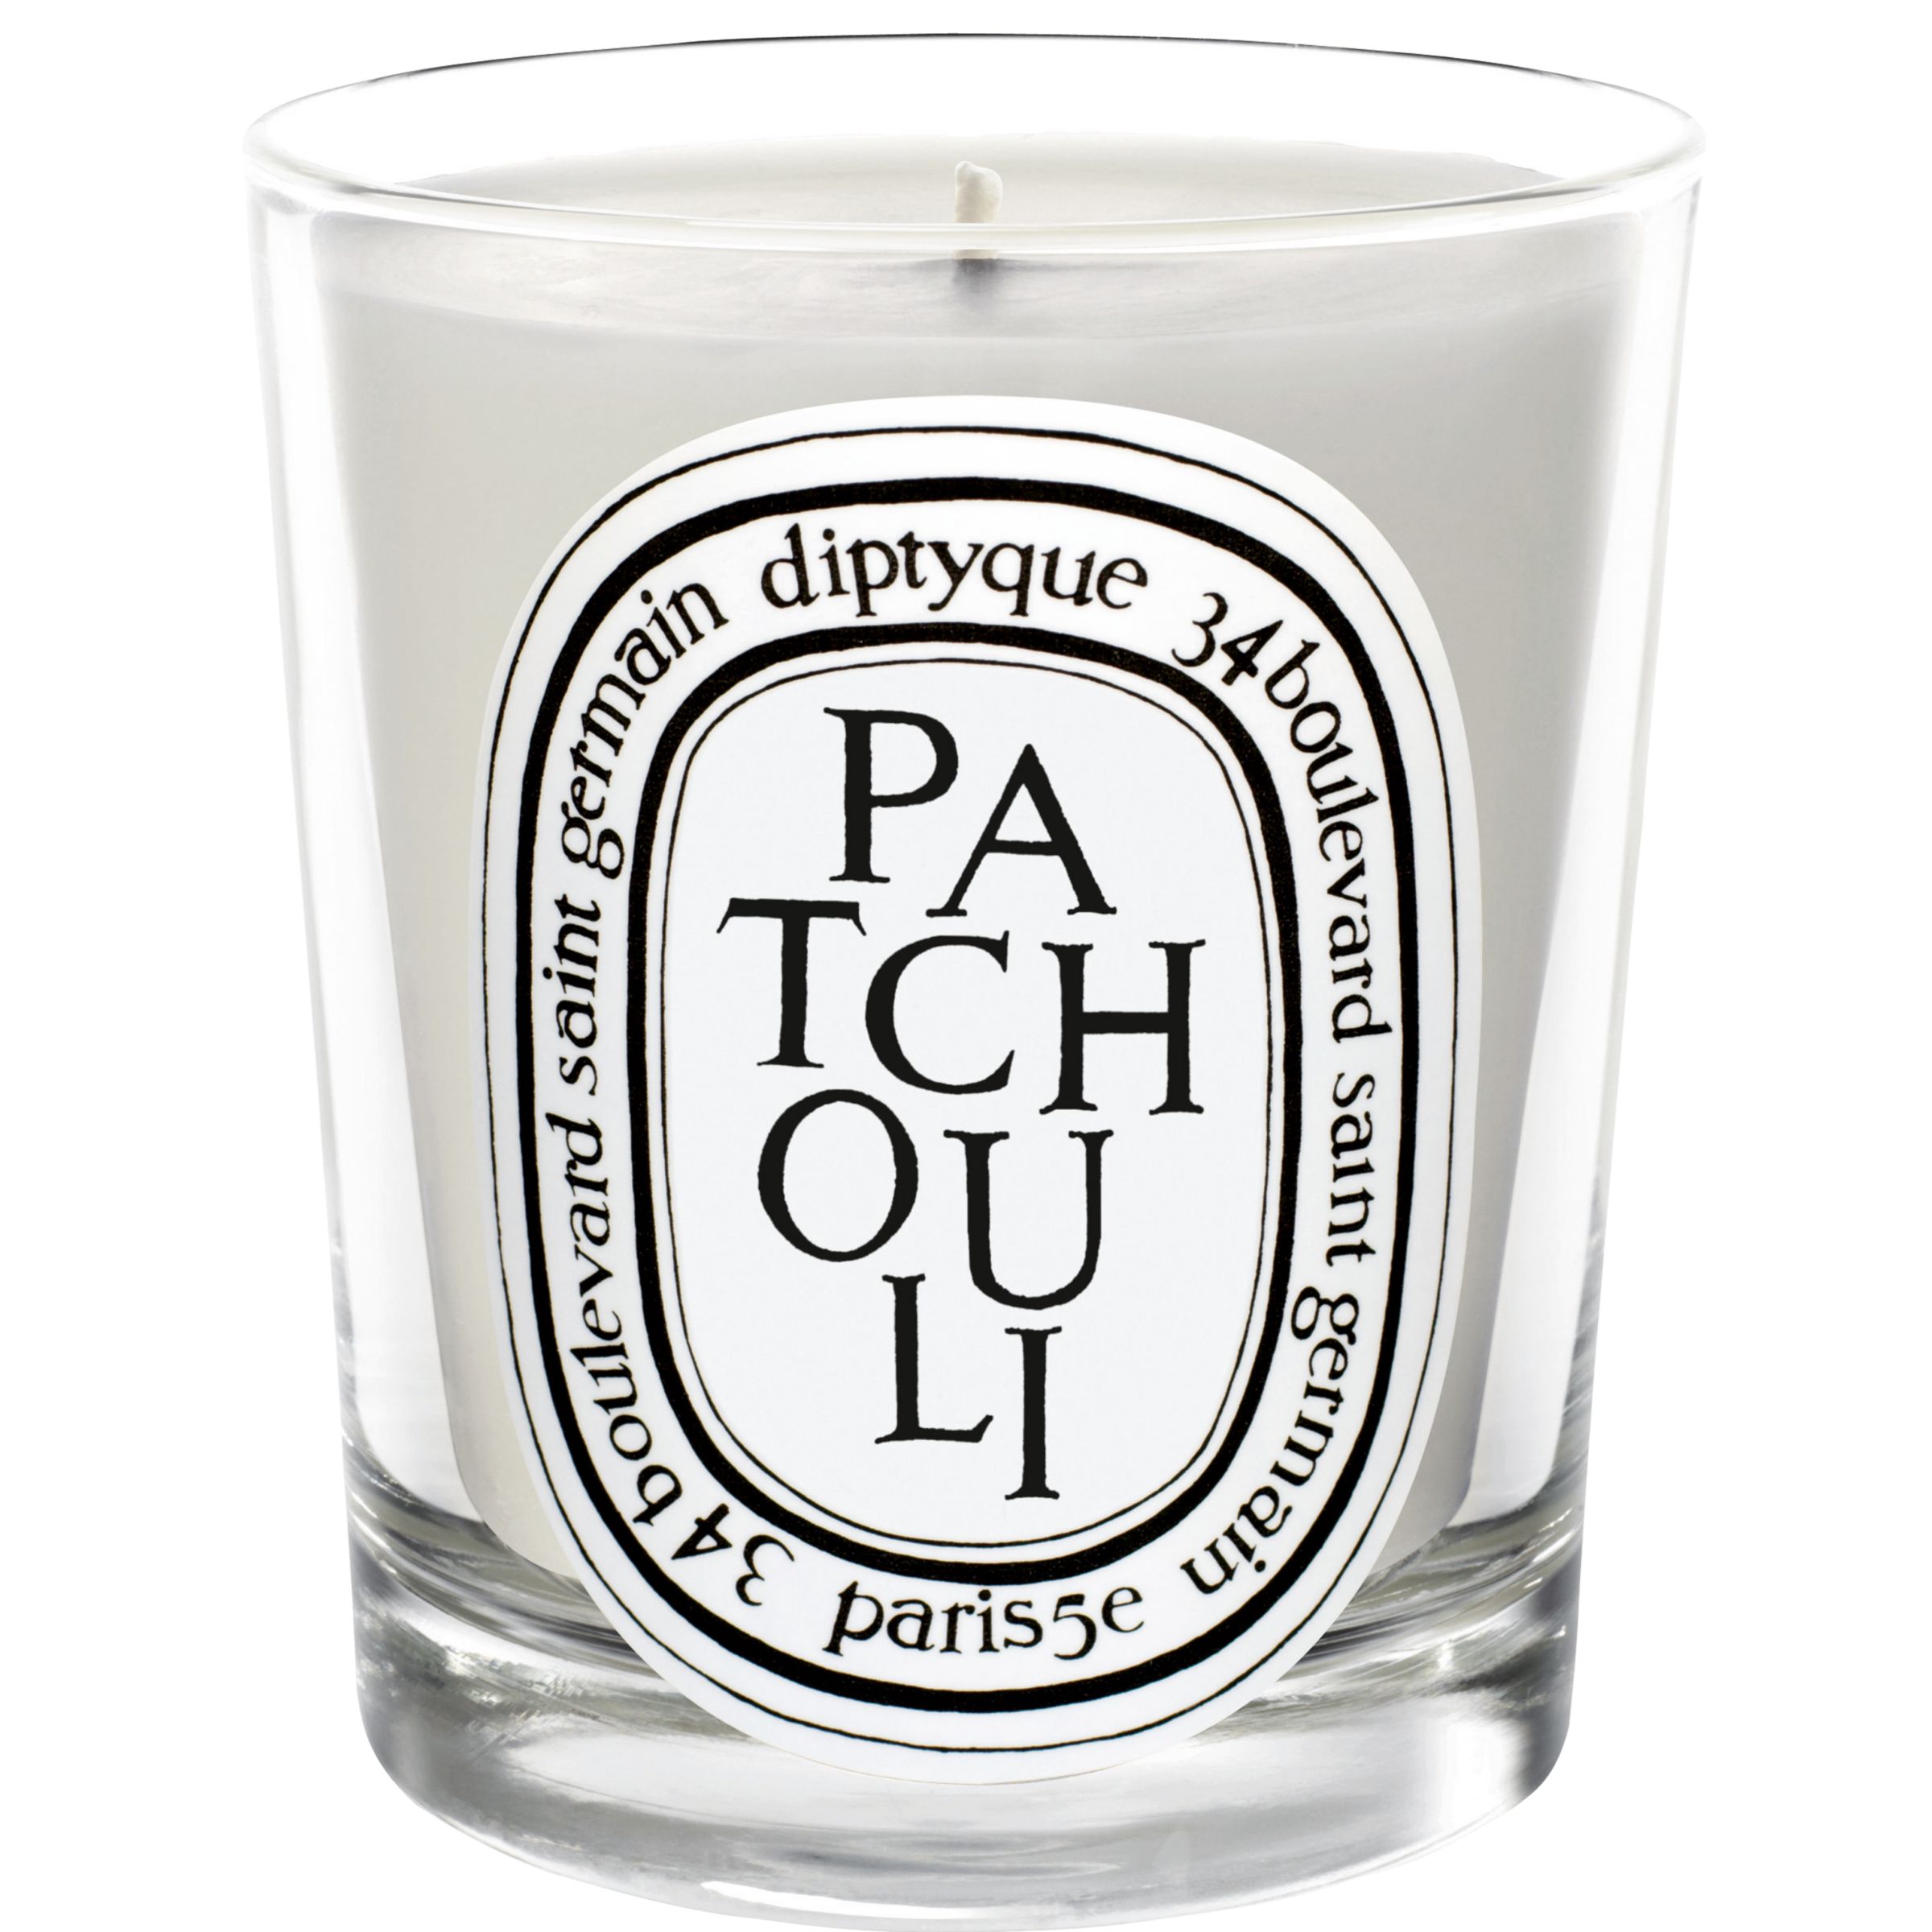 Diptyque Patchouli Scented Candle, 190g 230575983